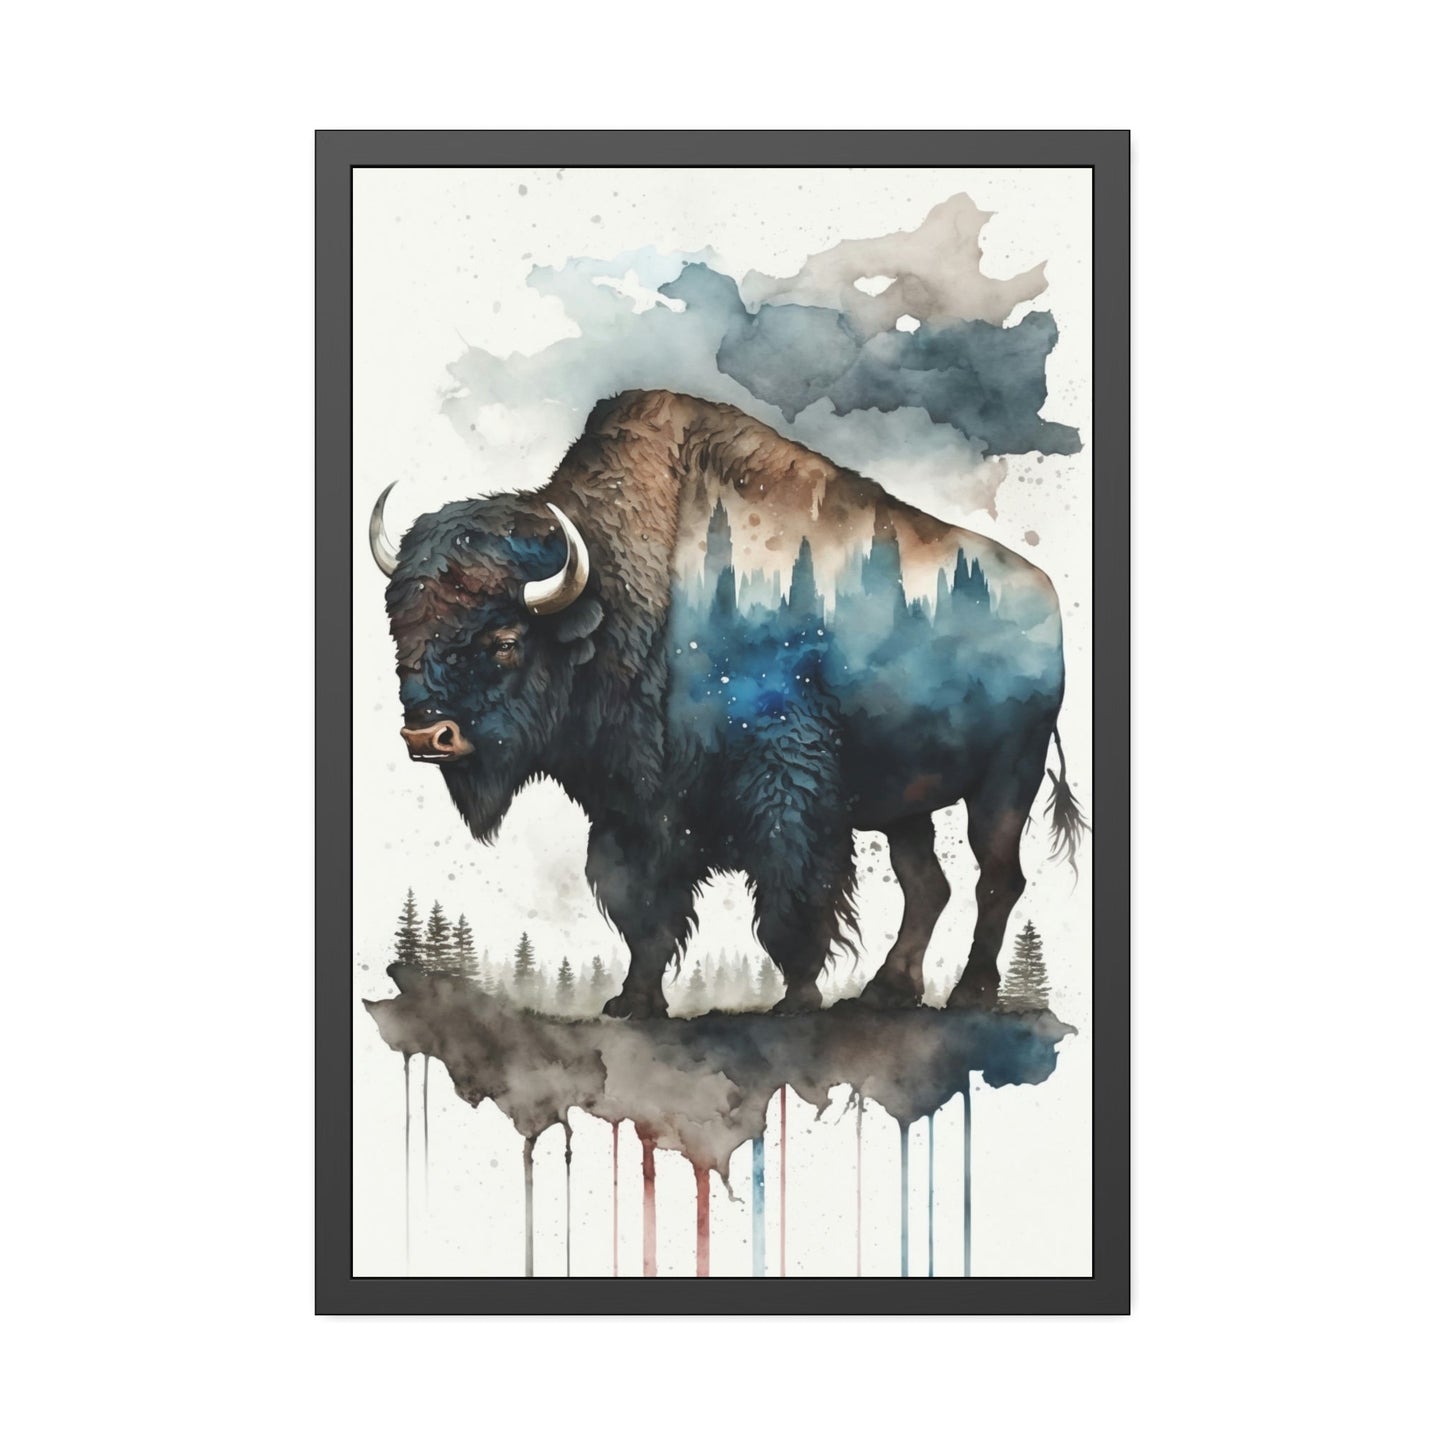 A Lone Buffalo in the Wild: An Inspiring Artwork on Canvas & Poster